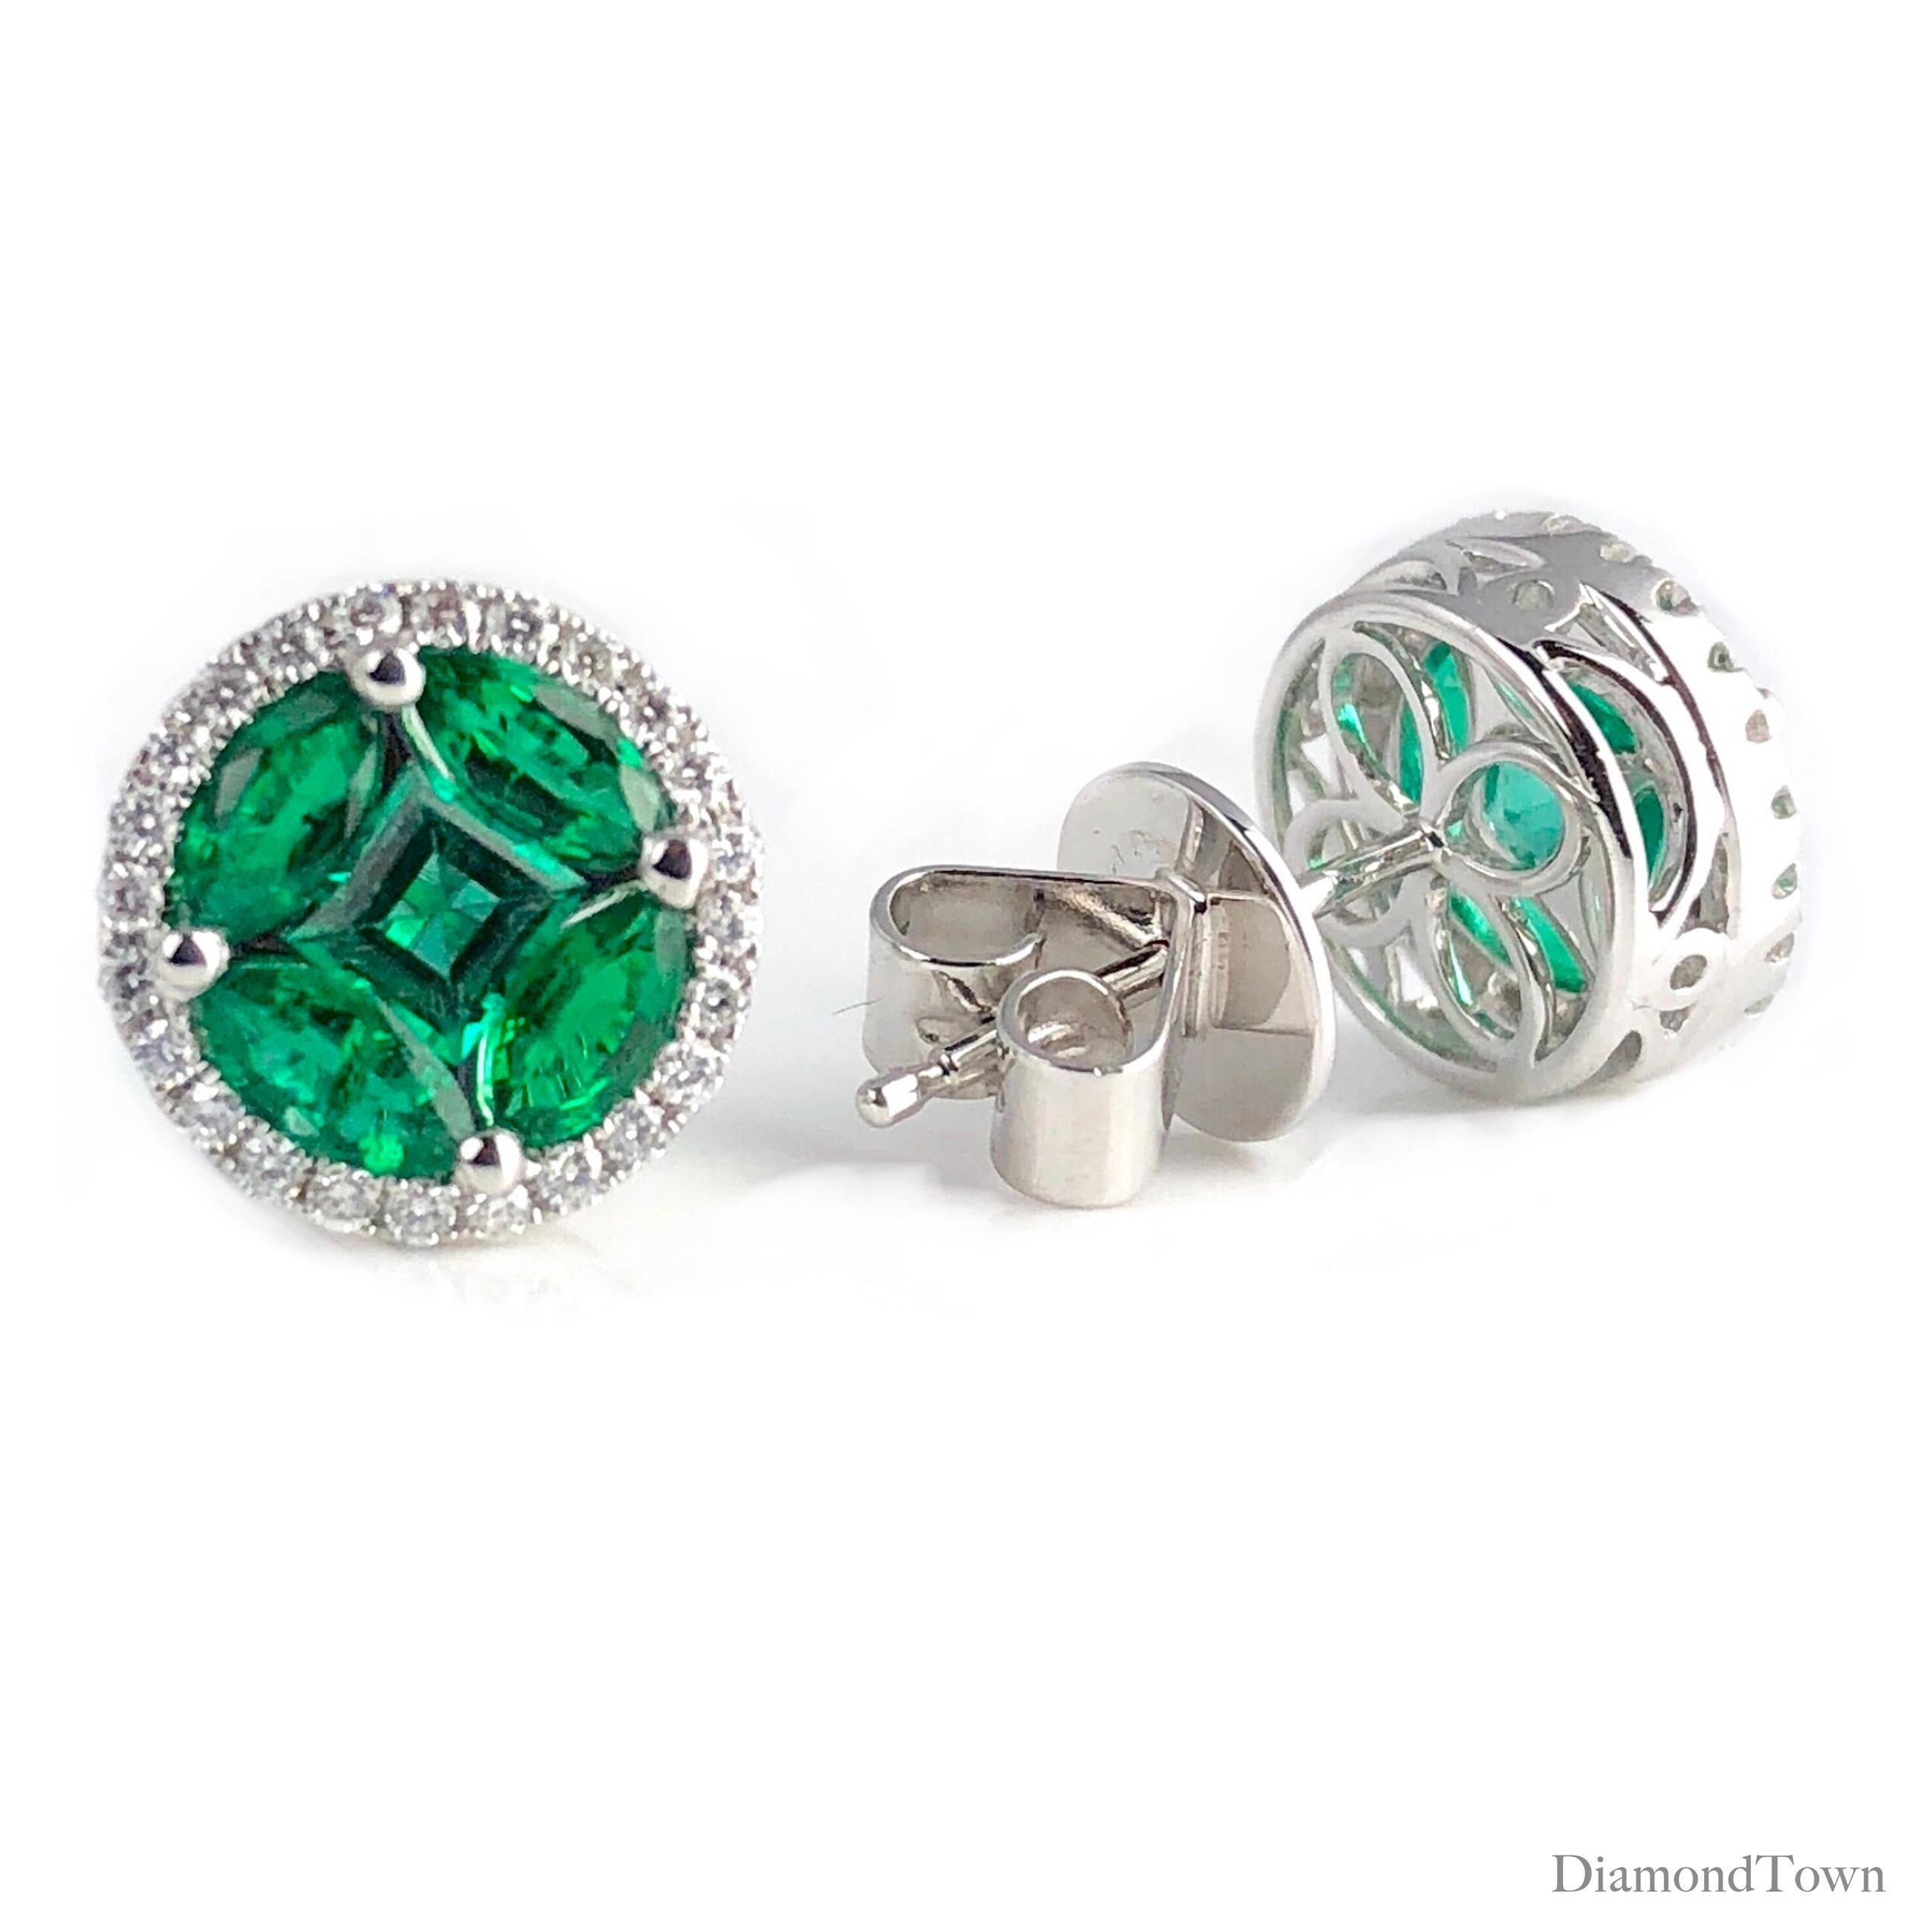 Introducing captivating round emerald stud earrings showcasing a vibrant cluster of brilliant green emeralds, totaling 1.28 carats, elegantly encircled by a dazzling halo of round natural diamonds, totaling 0.22 carats. Crafted in lustrous 18k White